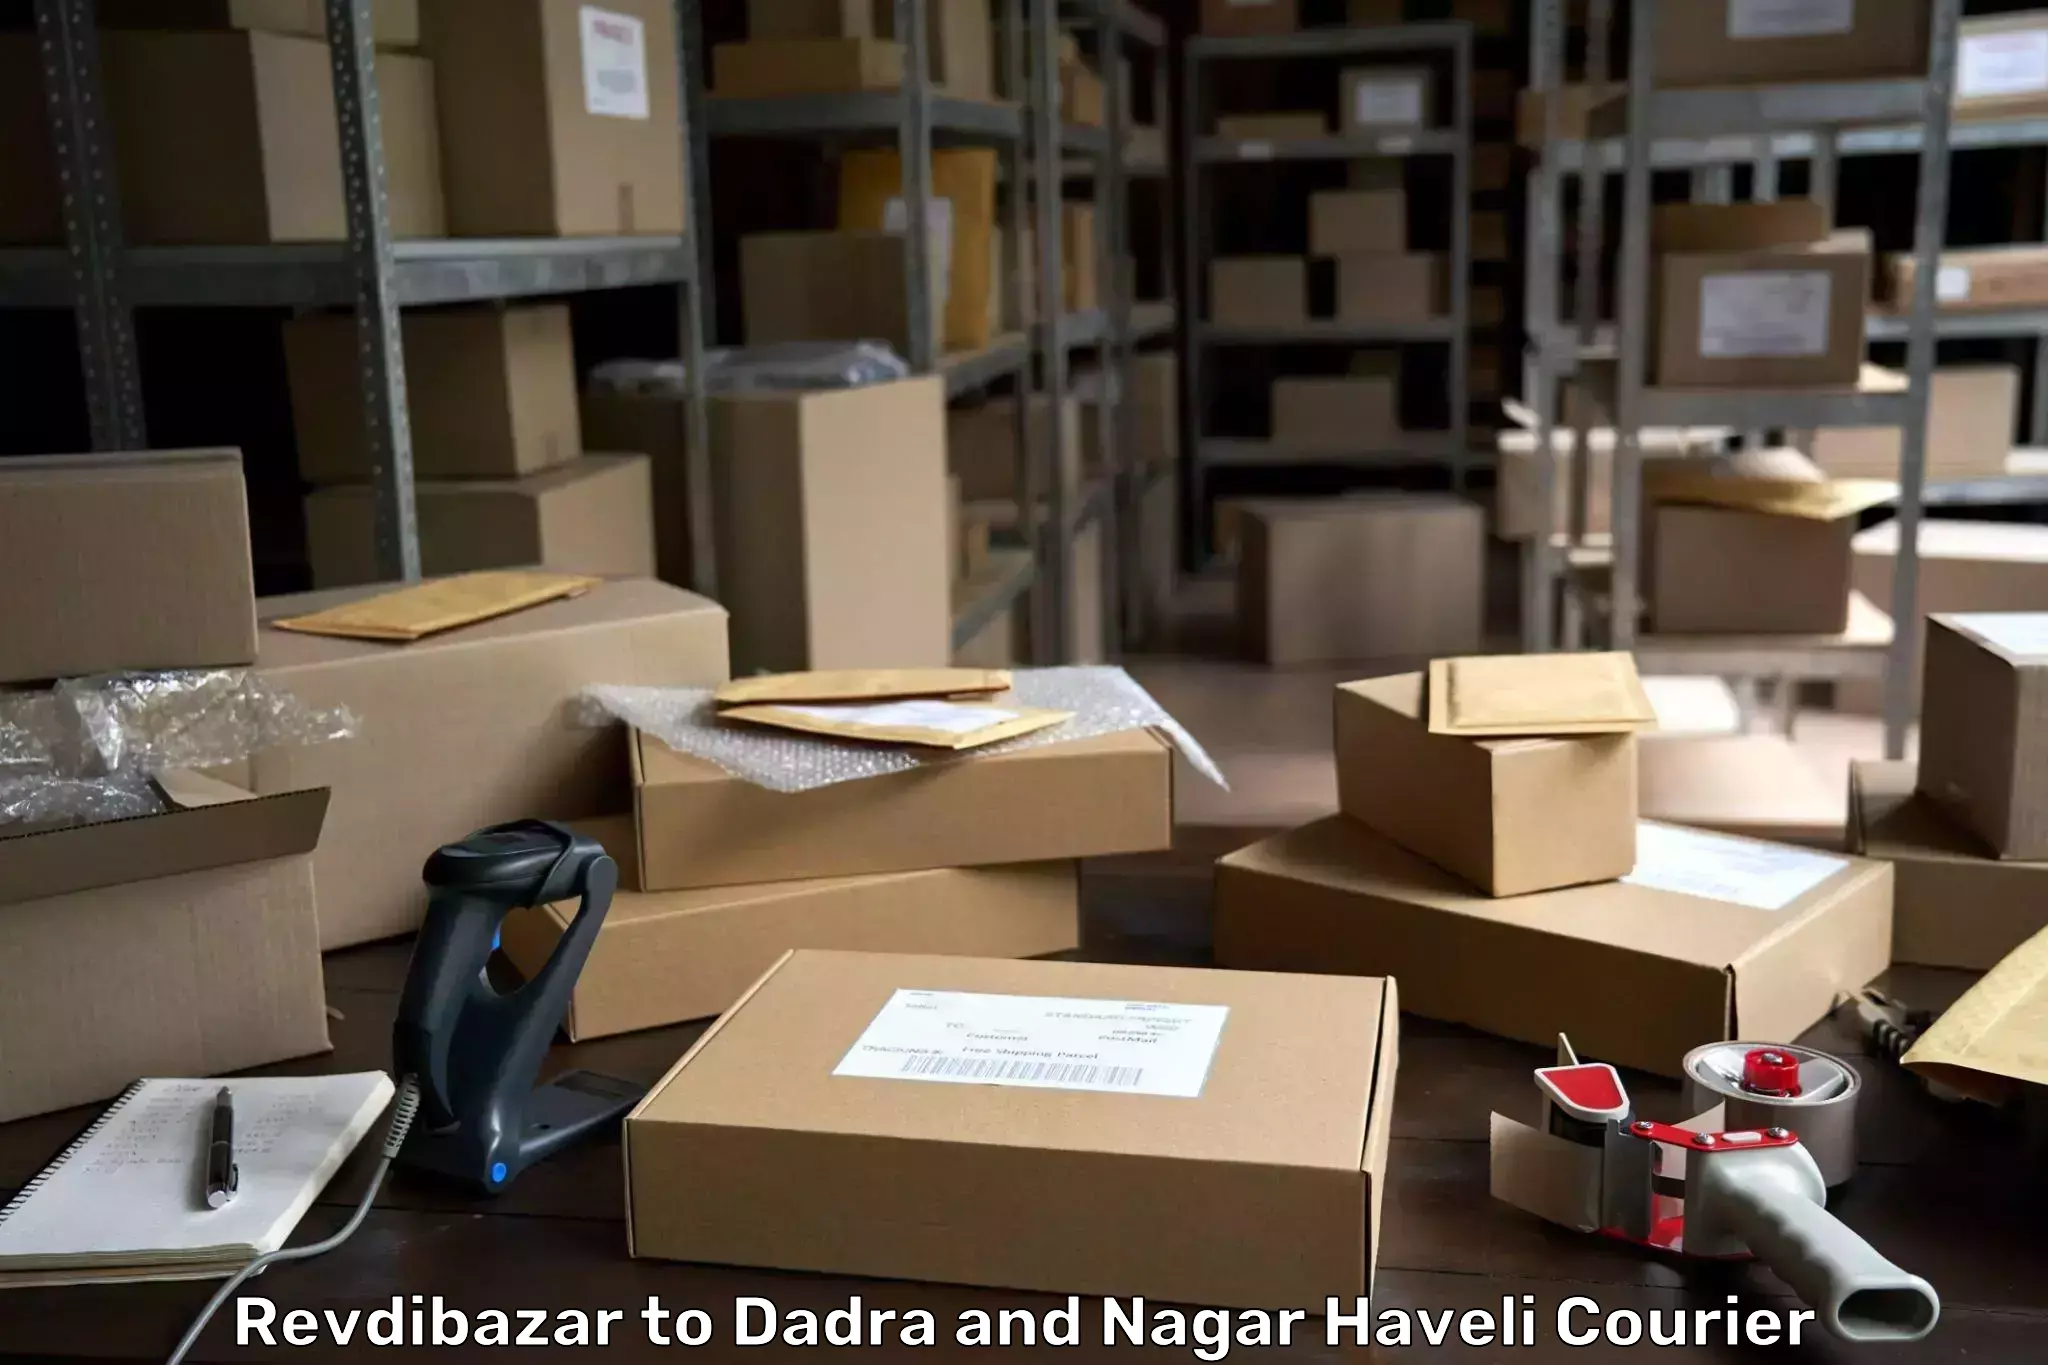 Same-day delivery solutions Revdibazar to Dadra and Nagar Haveli